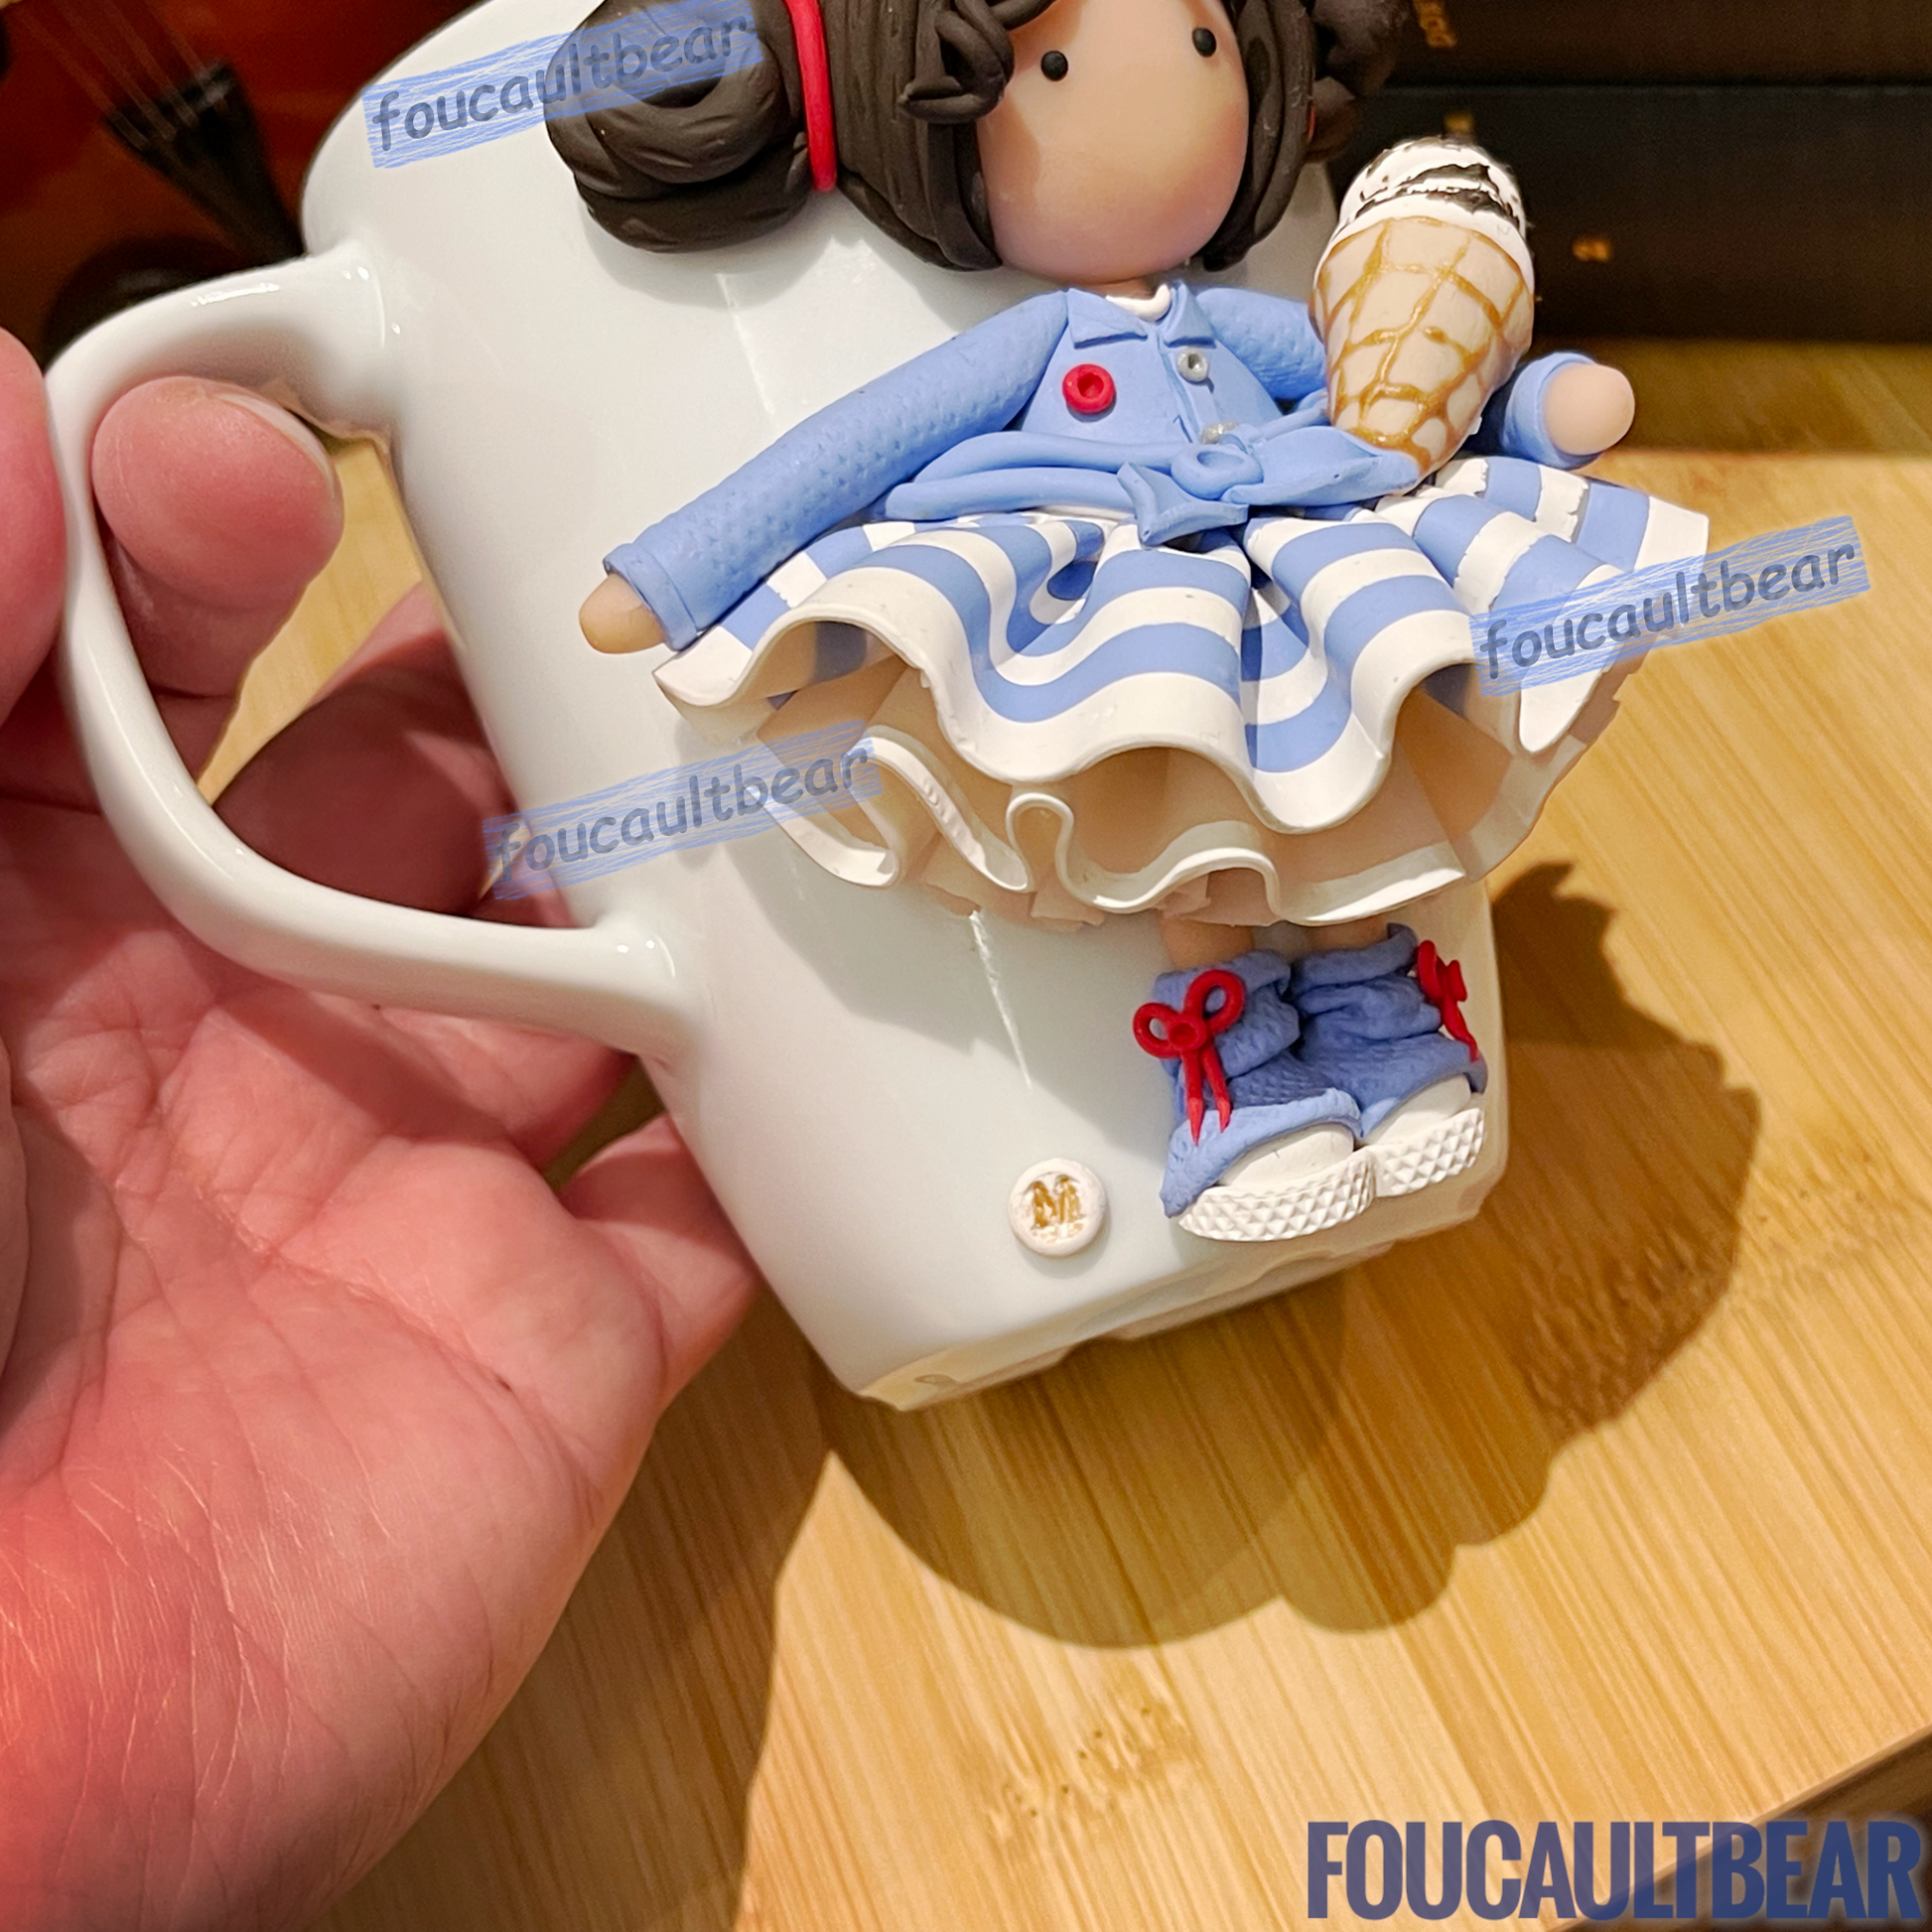 Beautifully adorned with Foucaultbear's clay art figurines, these porcelain cups and mugs will brighten your day everyday.